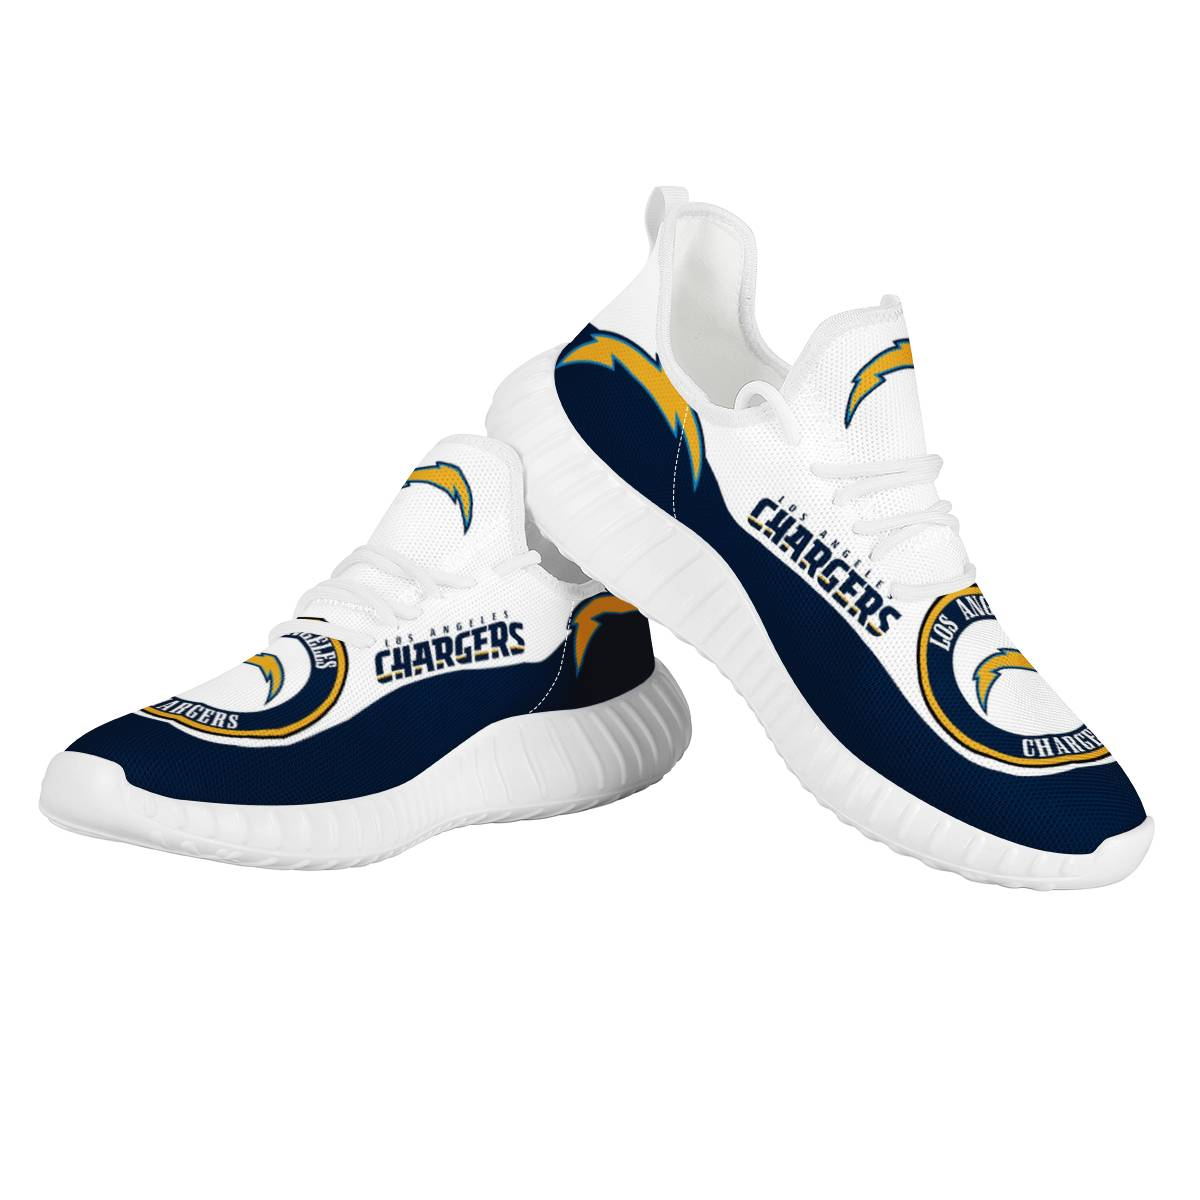 Men's Los Angeles Chargers Mesh Knit Sneakers/Shoes 002